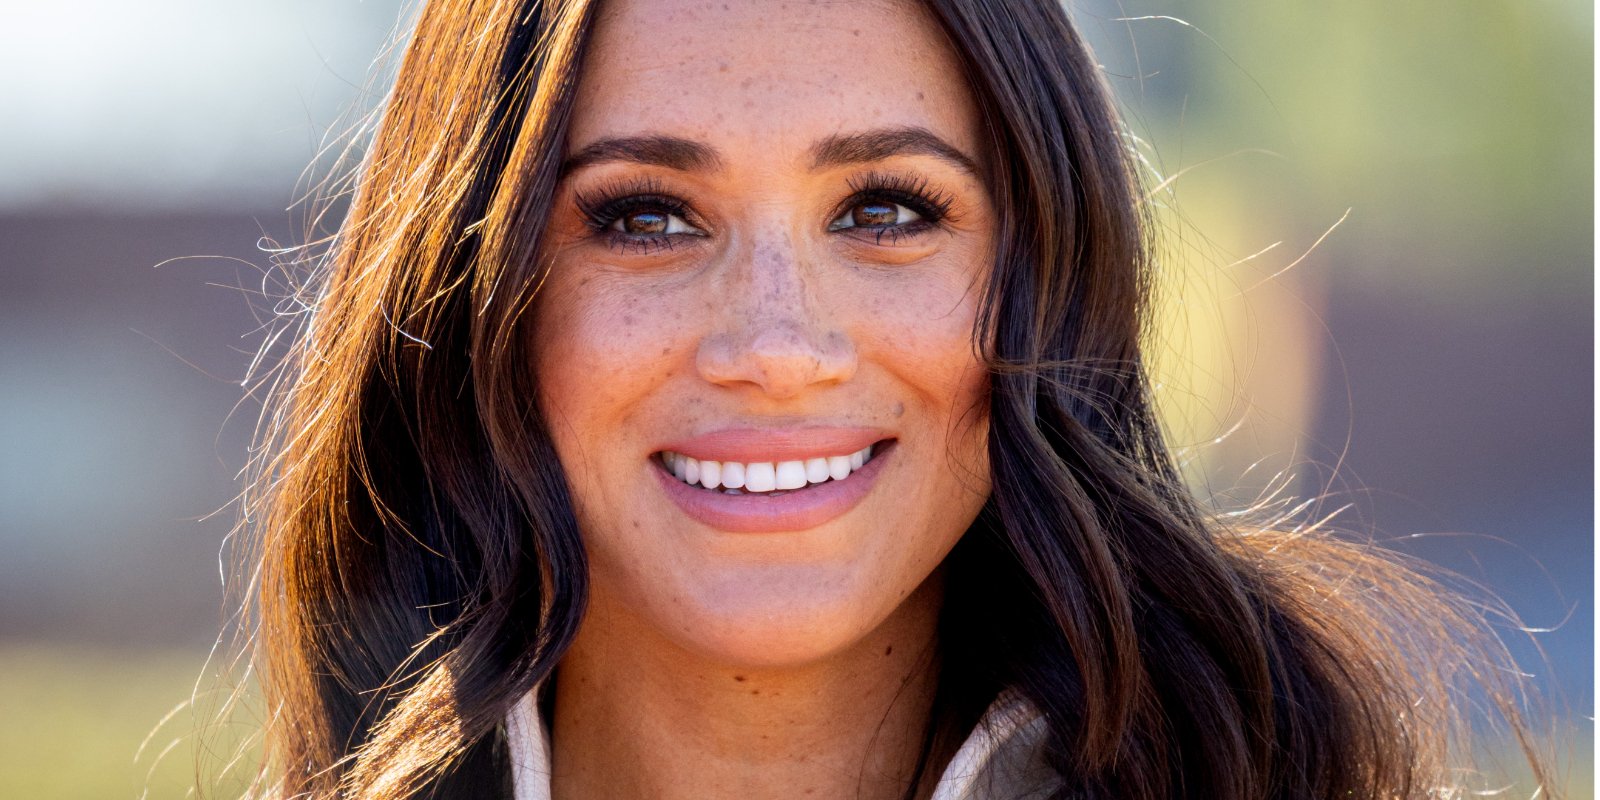 Meghan Markle poses during an Invictus Games event in 2022.